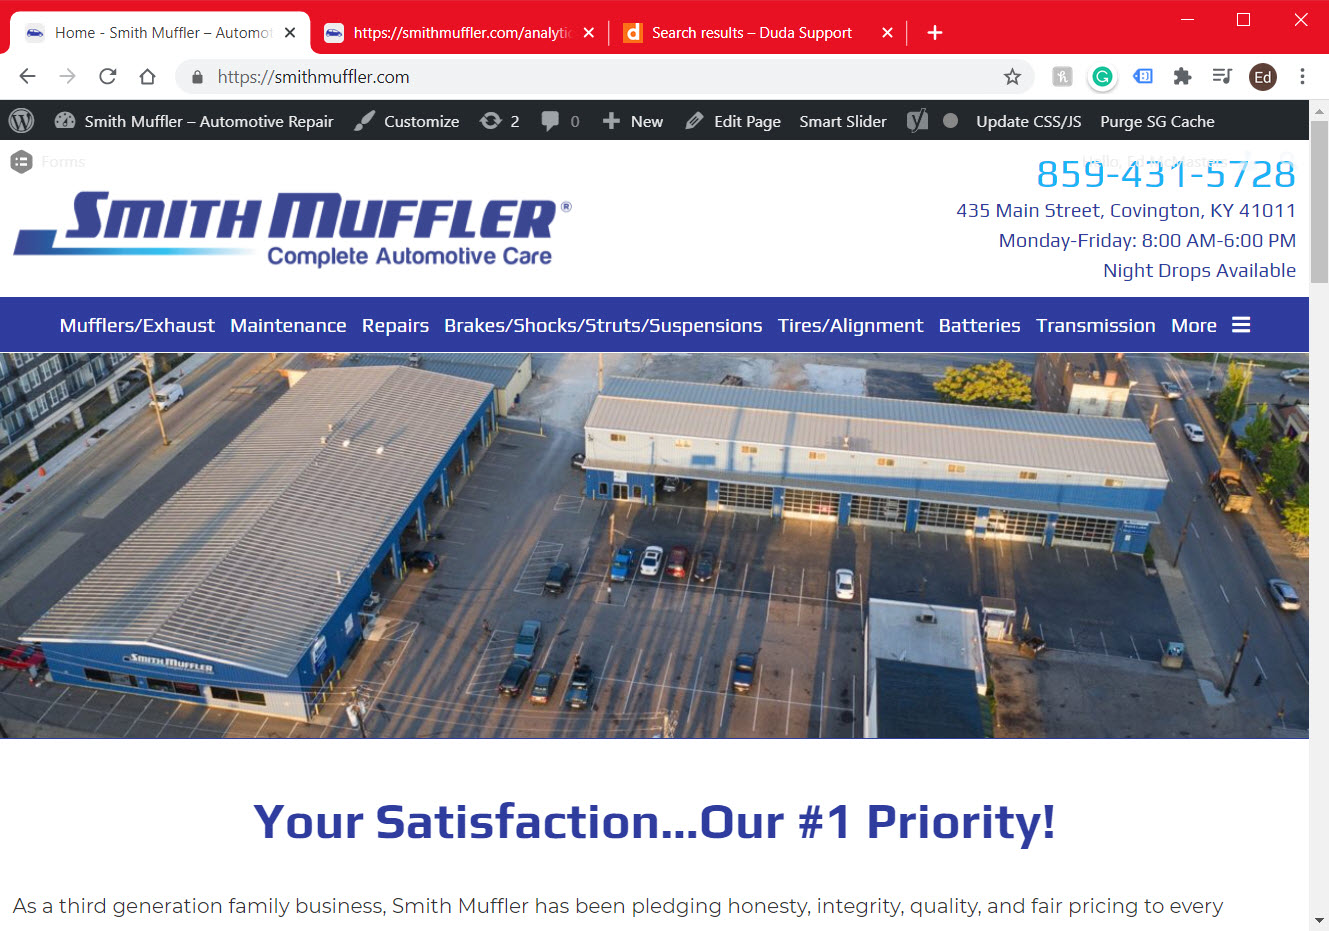 Picture One: Smith Muffler’s New Website
Smith Muffler – Complete Automotive Care revs up their customized, completely rebuilt, high performance website.  Smith provides complete bumper to bumper service for cars, trucks and high performance vehicles.    Fourth generation, family owned and operated – Covington, Kentucky. 
